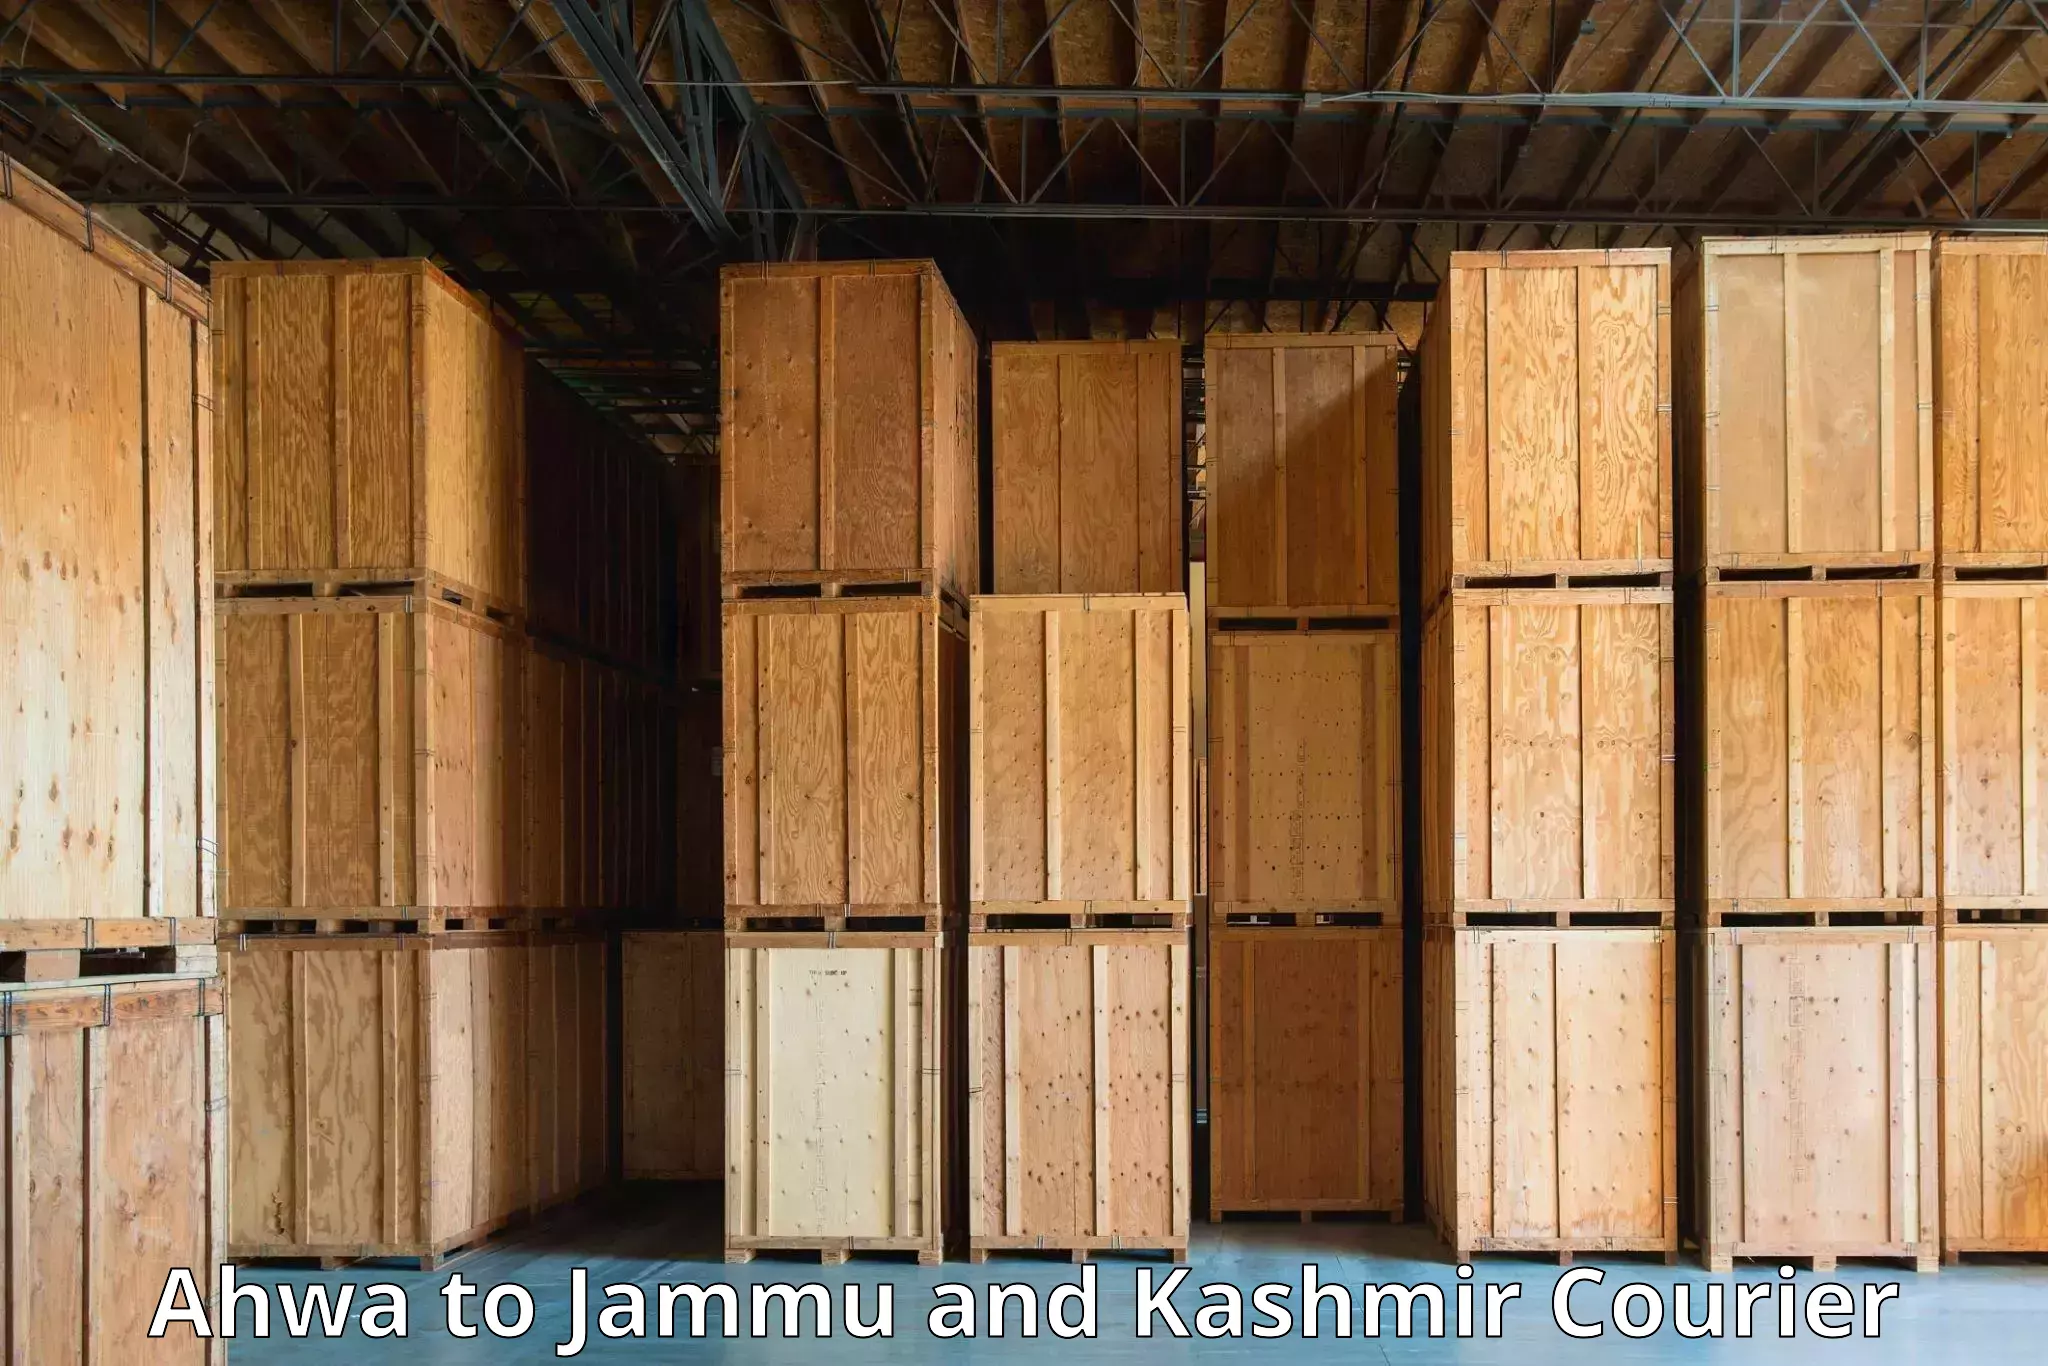 Courier service partnerships Ahwa to Anantnag